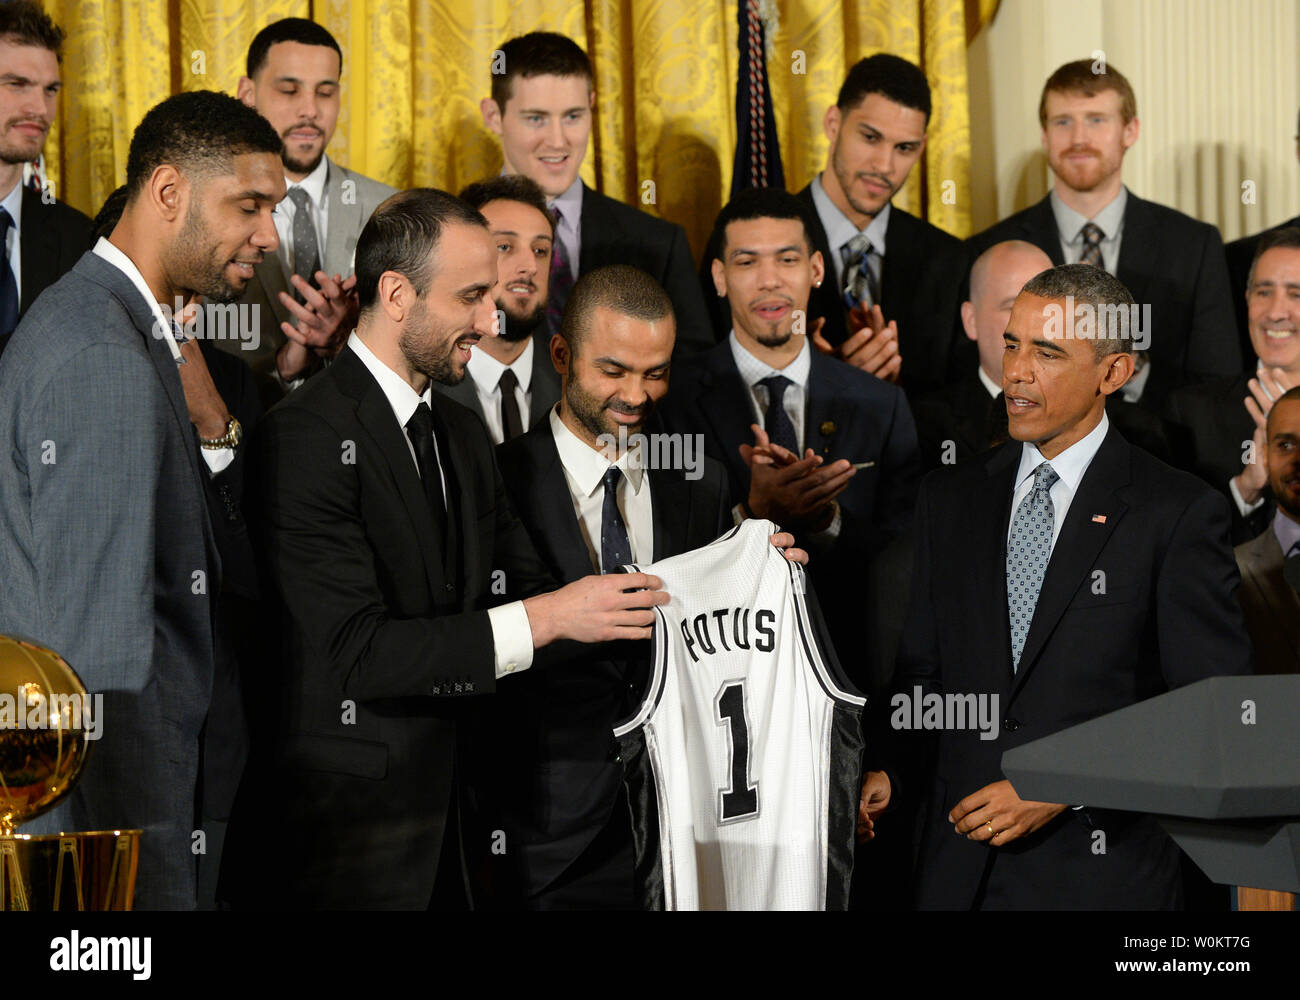 U.S. President Barack Obama receives a game jersey from San Antonio Spurs player Manu Ginobili (L) as Obama honors the 2014 NBA Champion Spurs in the East Room of the White House in Washington, DC. on January 12, 2015.  The Spurs won their fifth championship.   Photo by Pat Benic/UPI Stock Photo